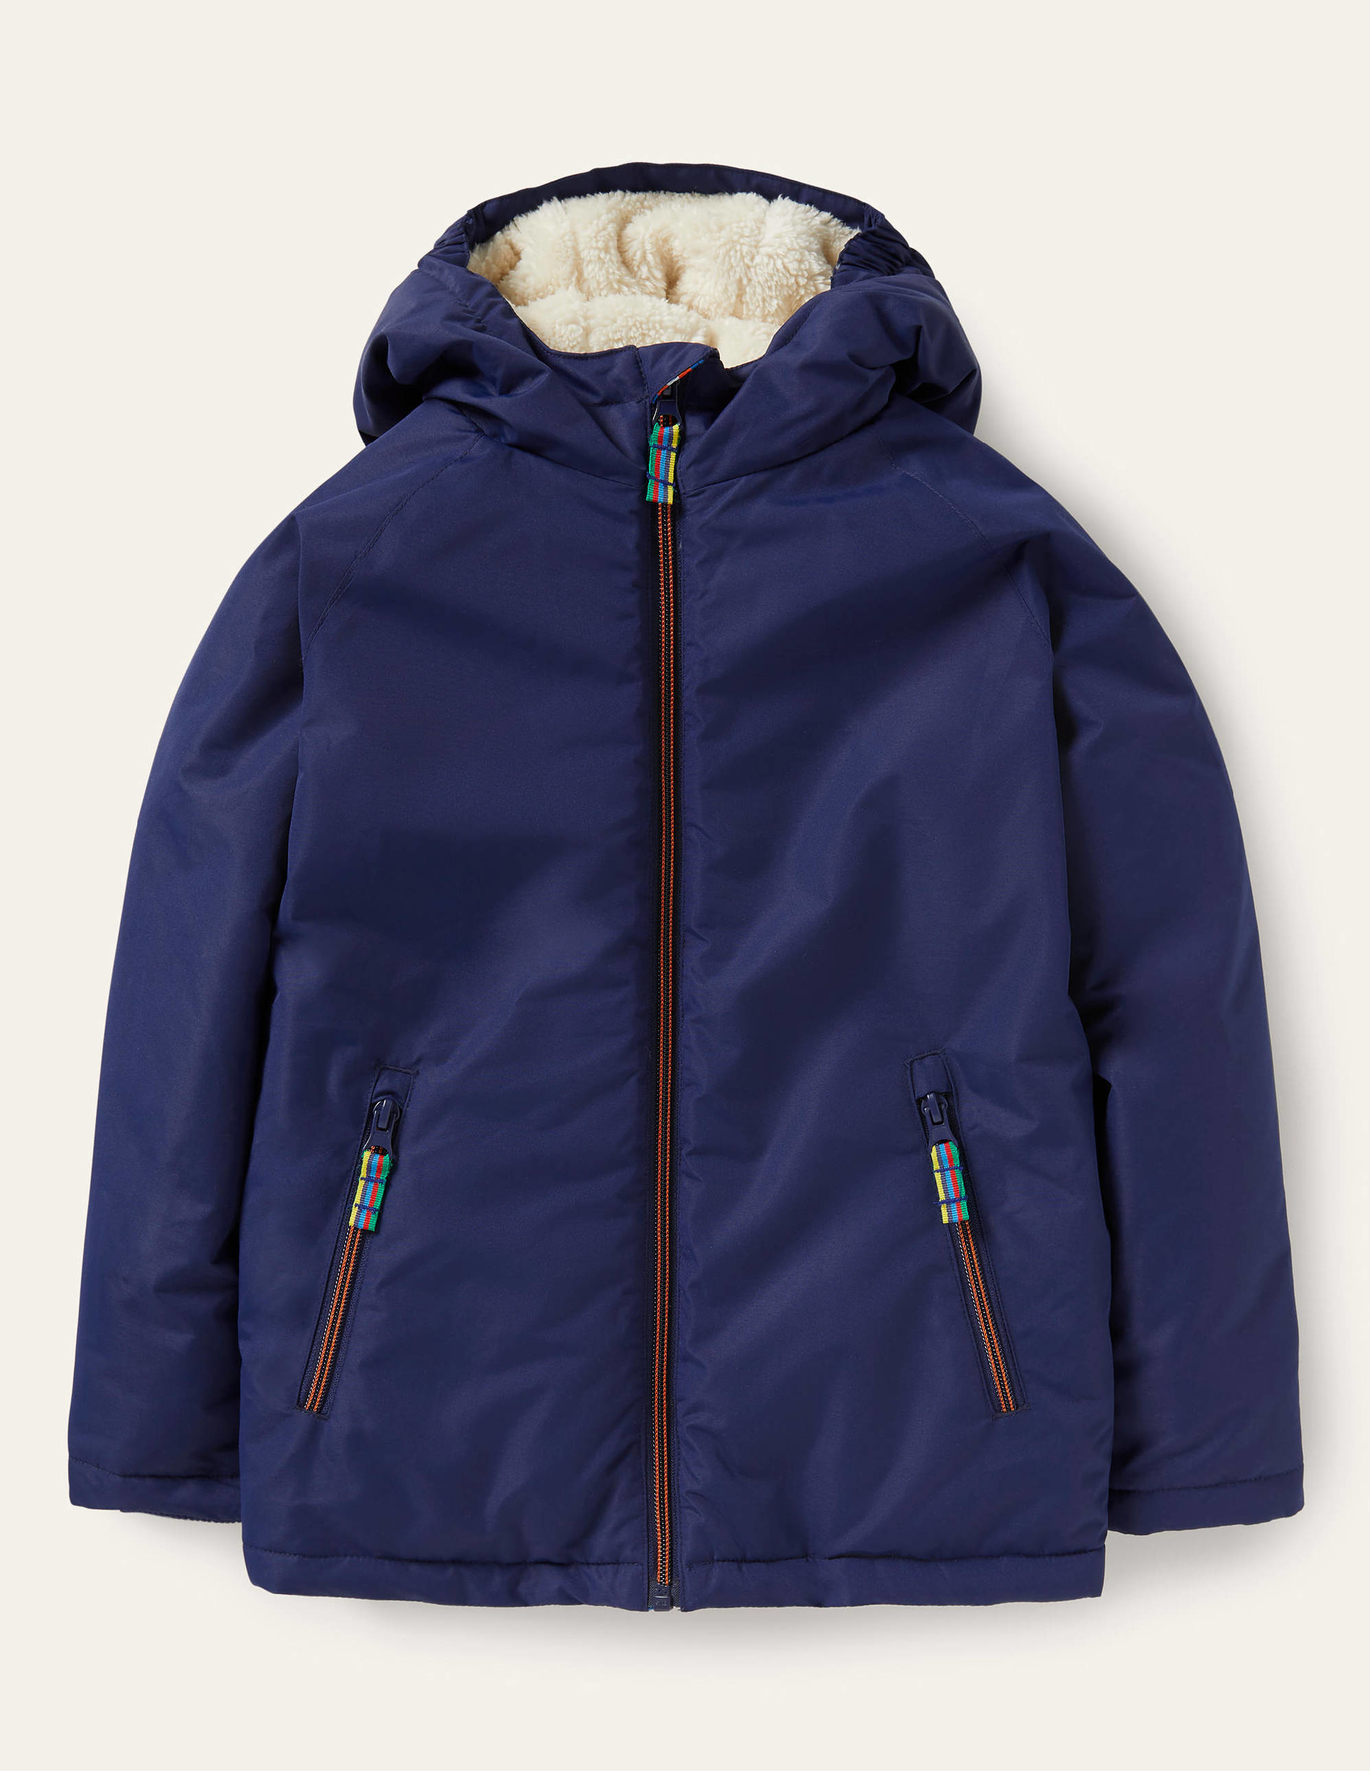 Boden Navy Sherpa-lined Anorak - College Navy